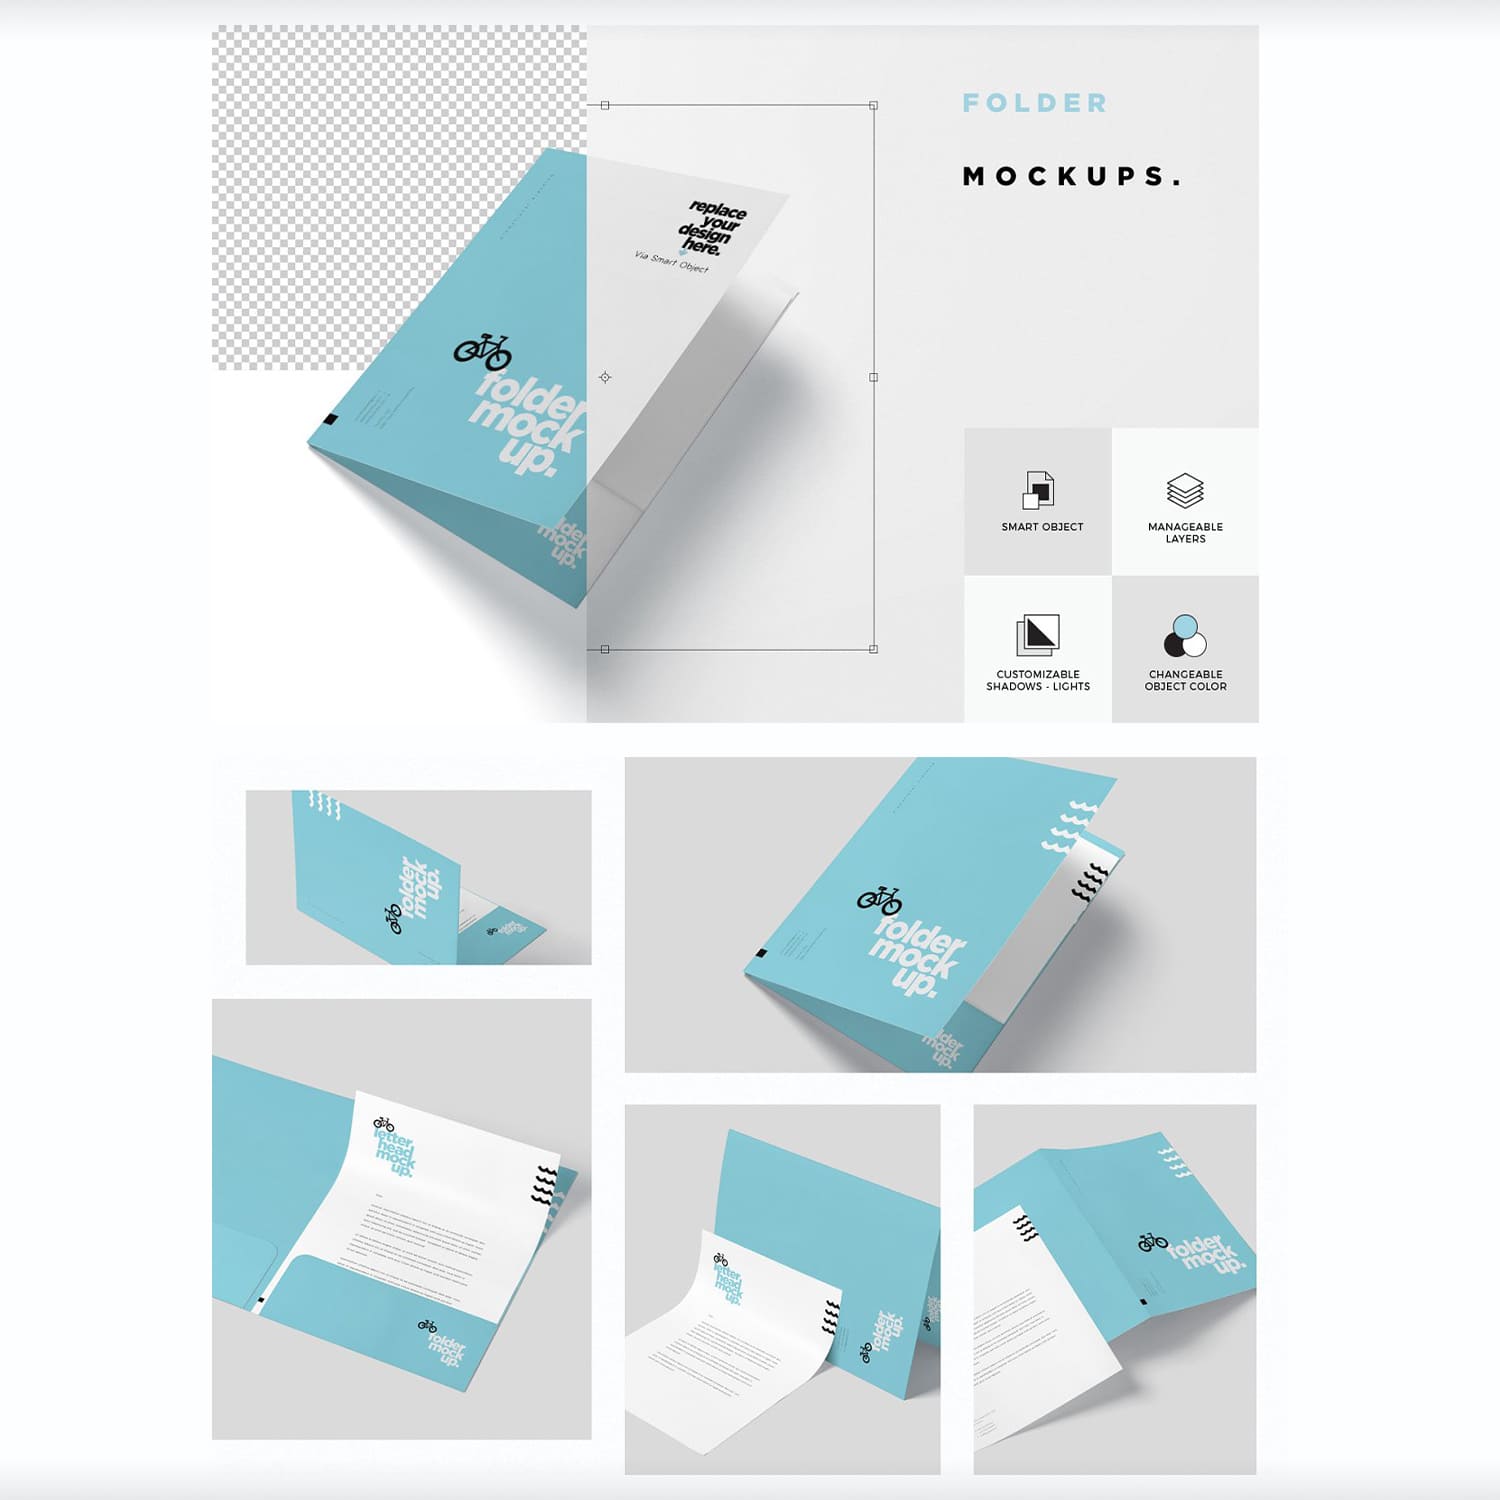 A set of images of paper folders with an adorable design.